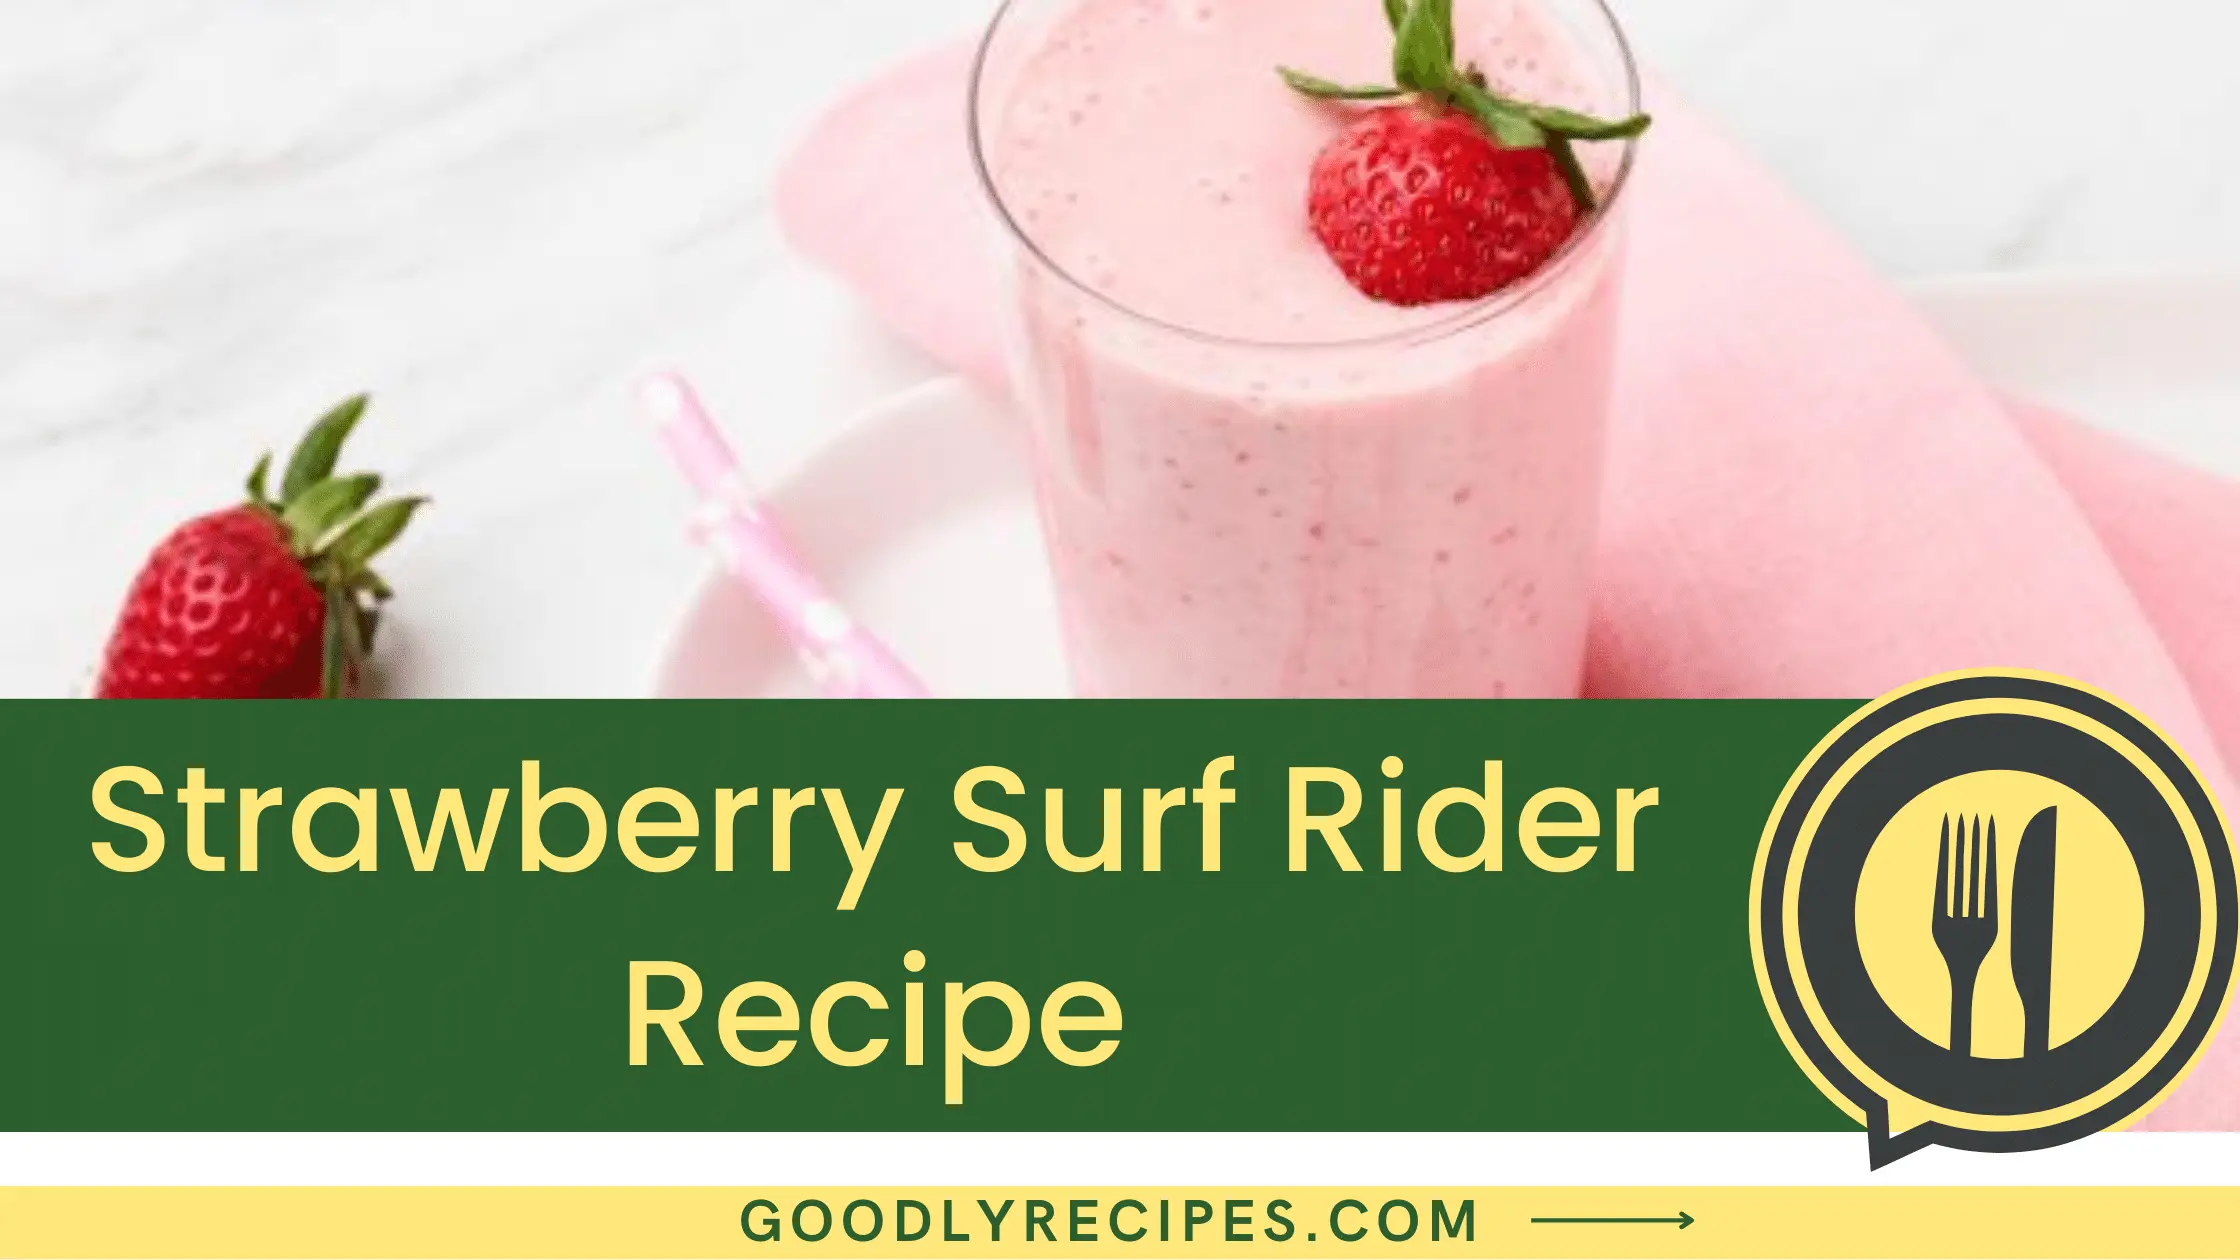 What is Strawberry Surf Rider?